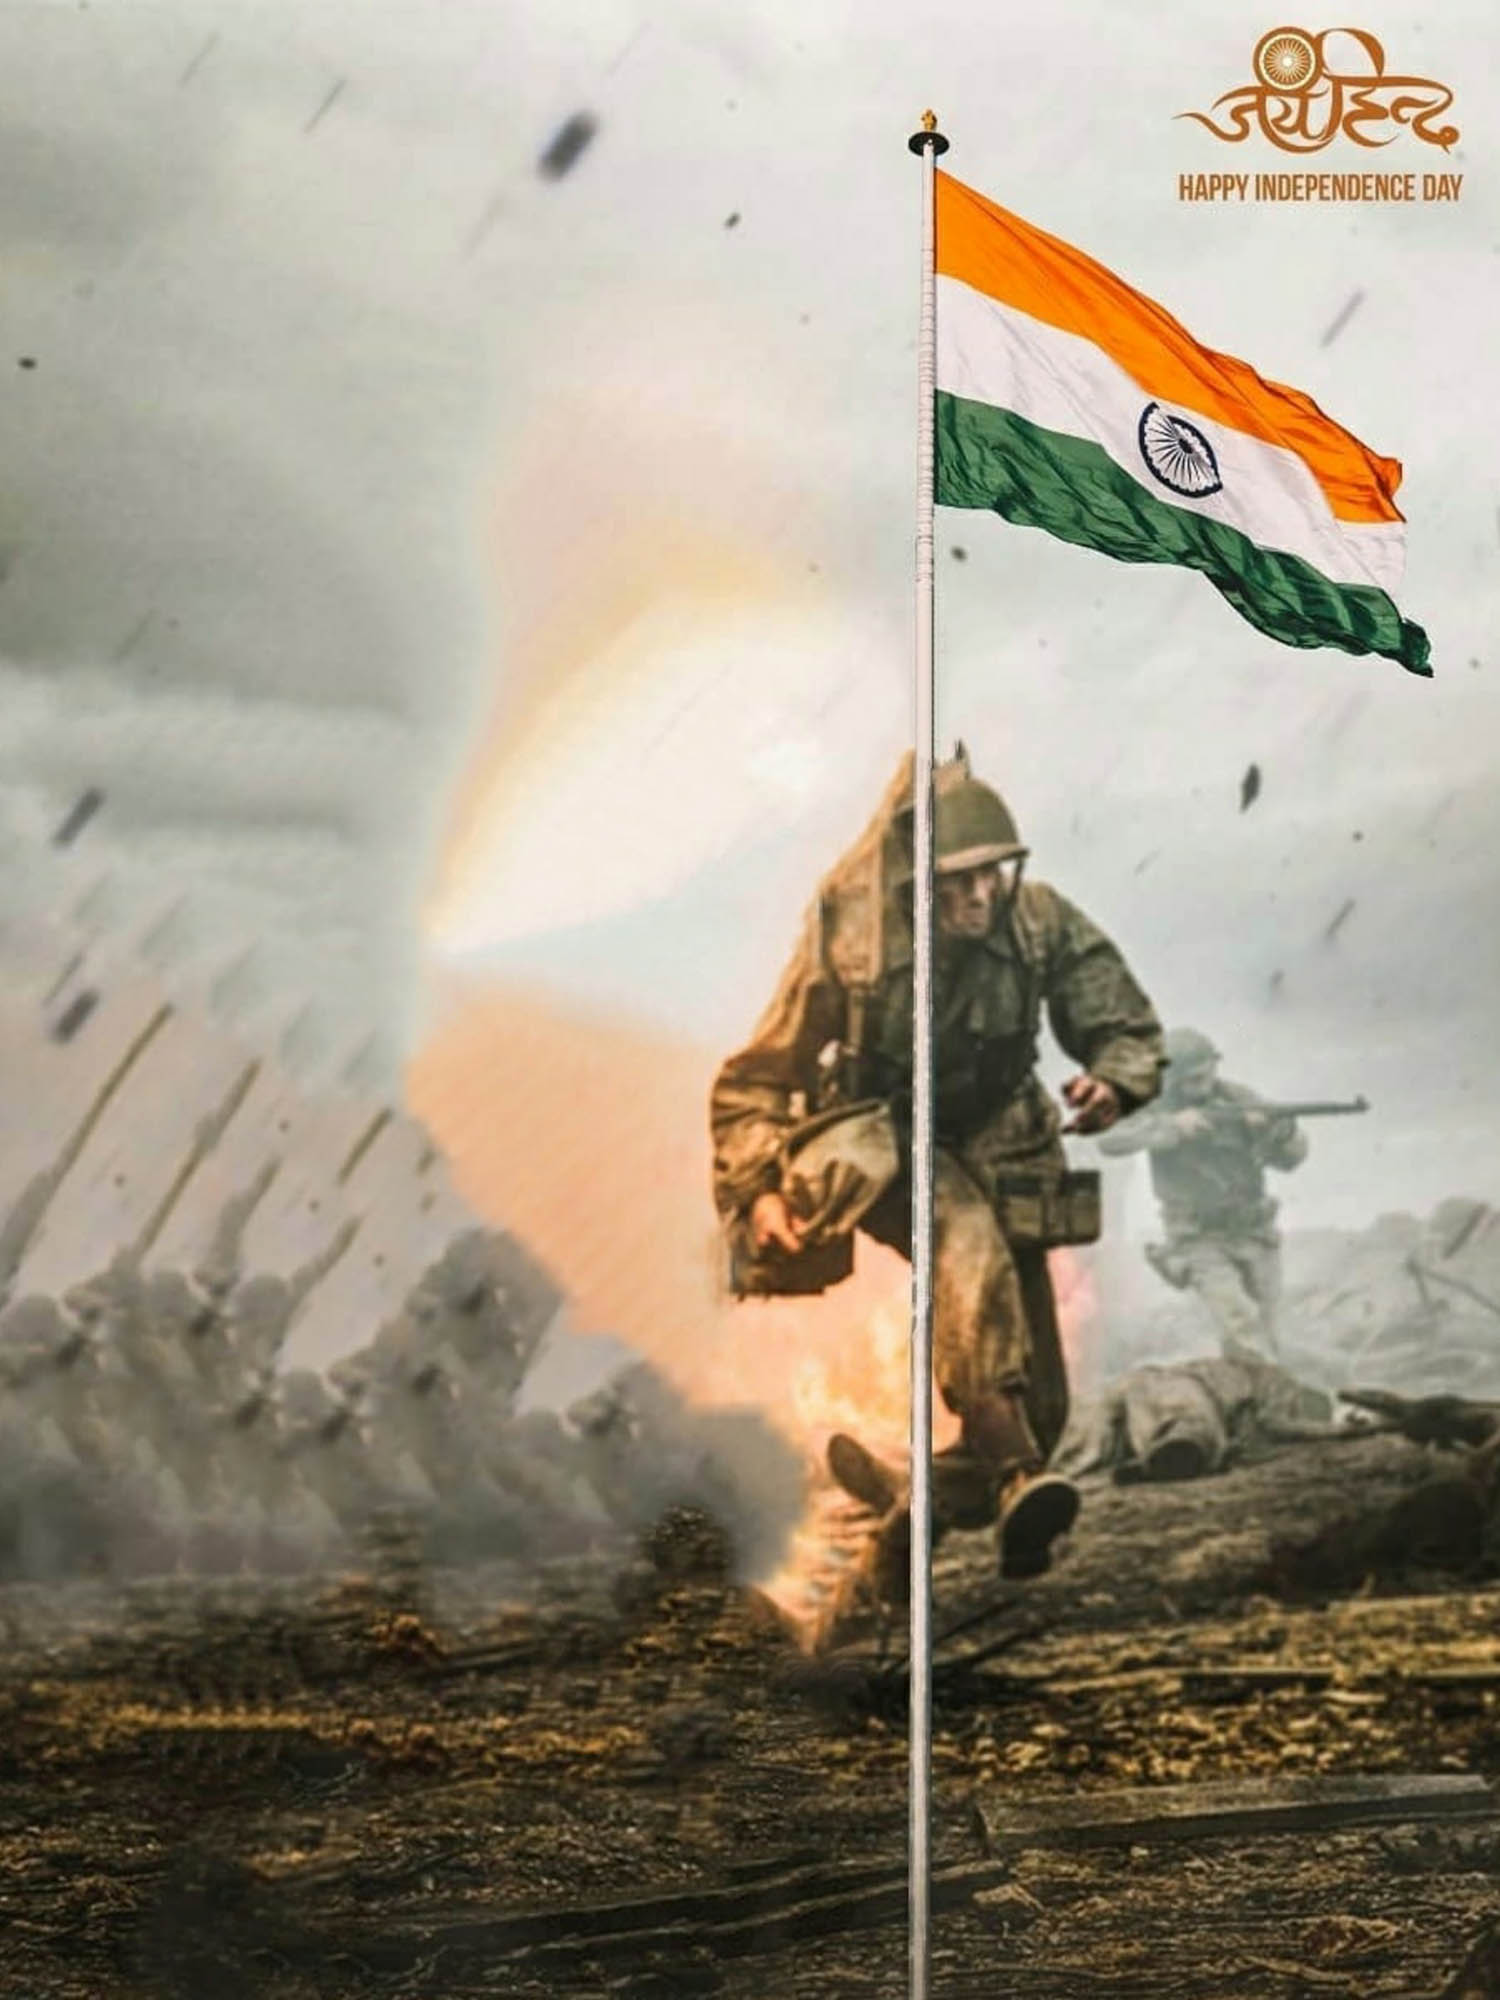 Pin by Dharmveer Editz on 26 January hd background | Independence day  background, Indian flag photos, Indian flag images